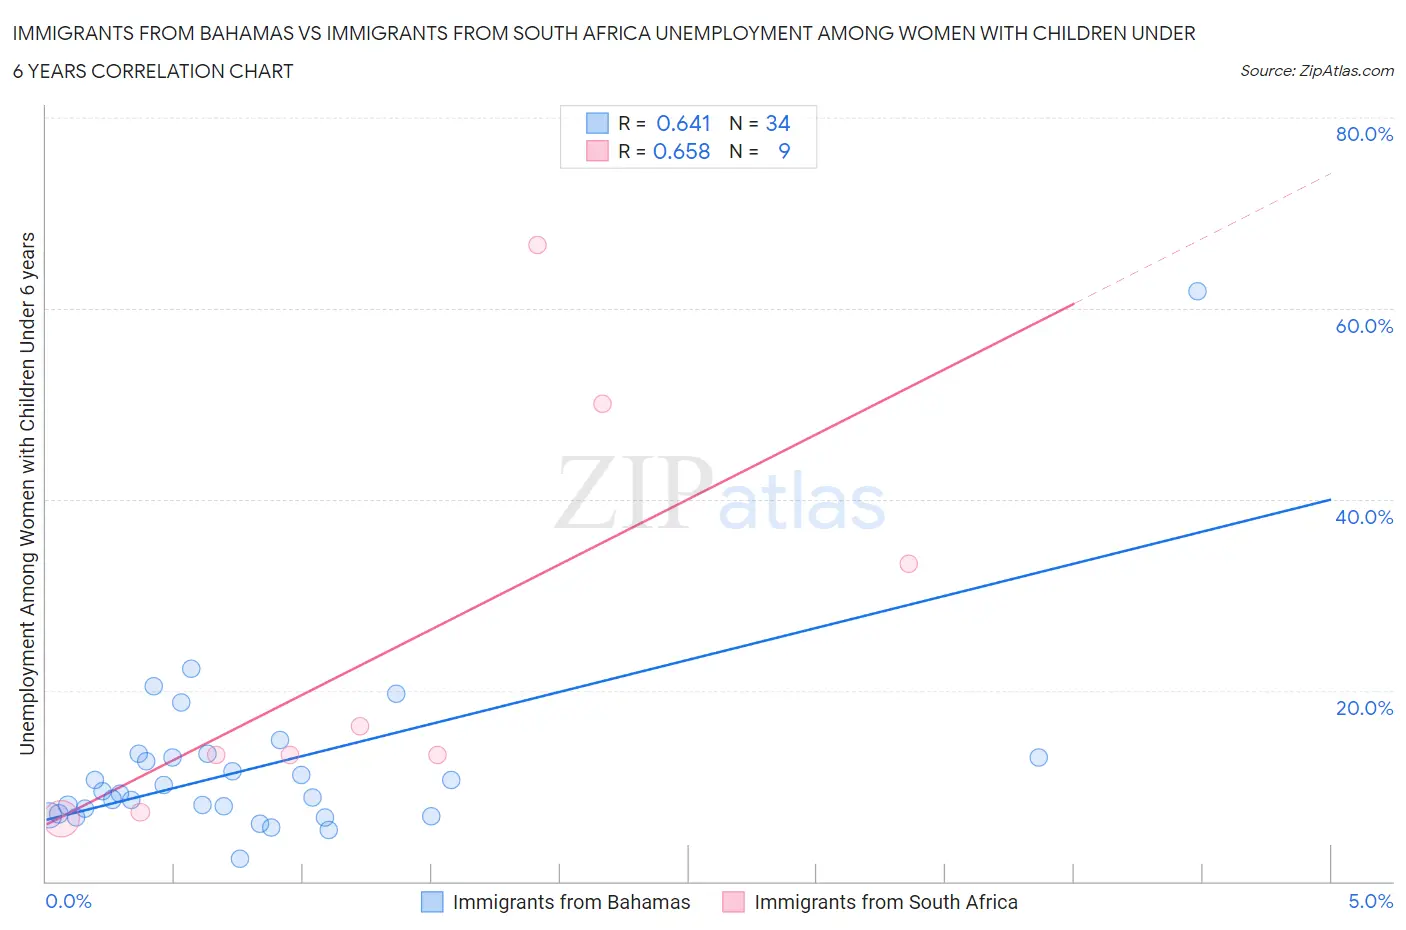 Immigrants from Bahamas vs Immigrants from South Africa Unemployment Among Women with Children Under 6 years